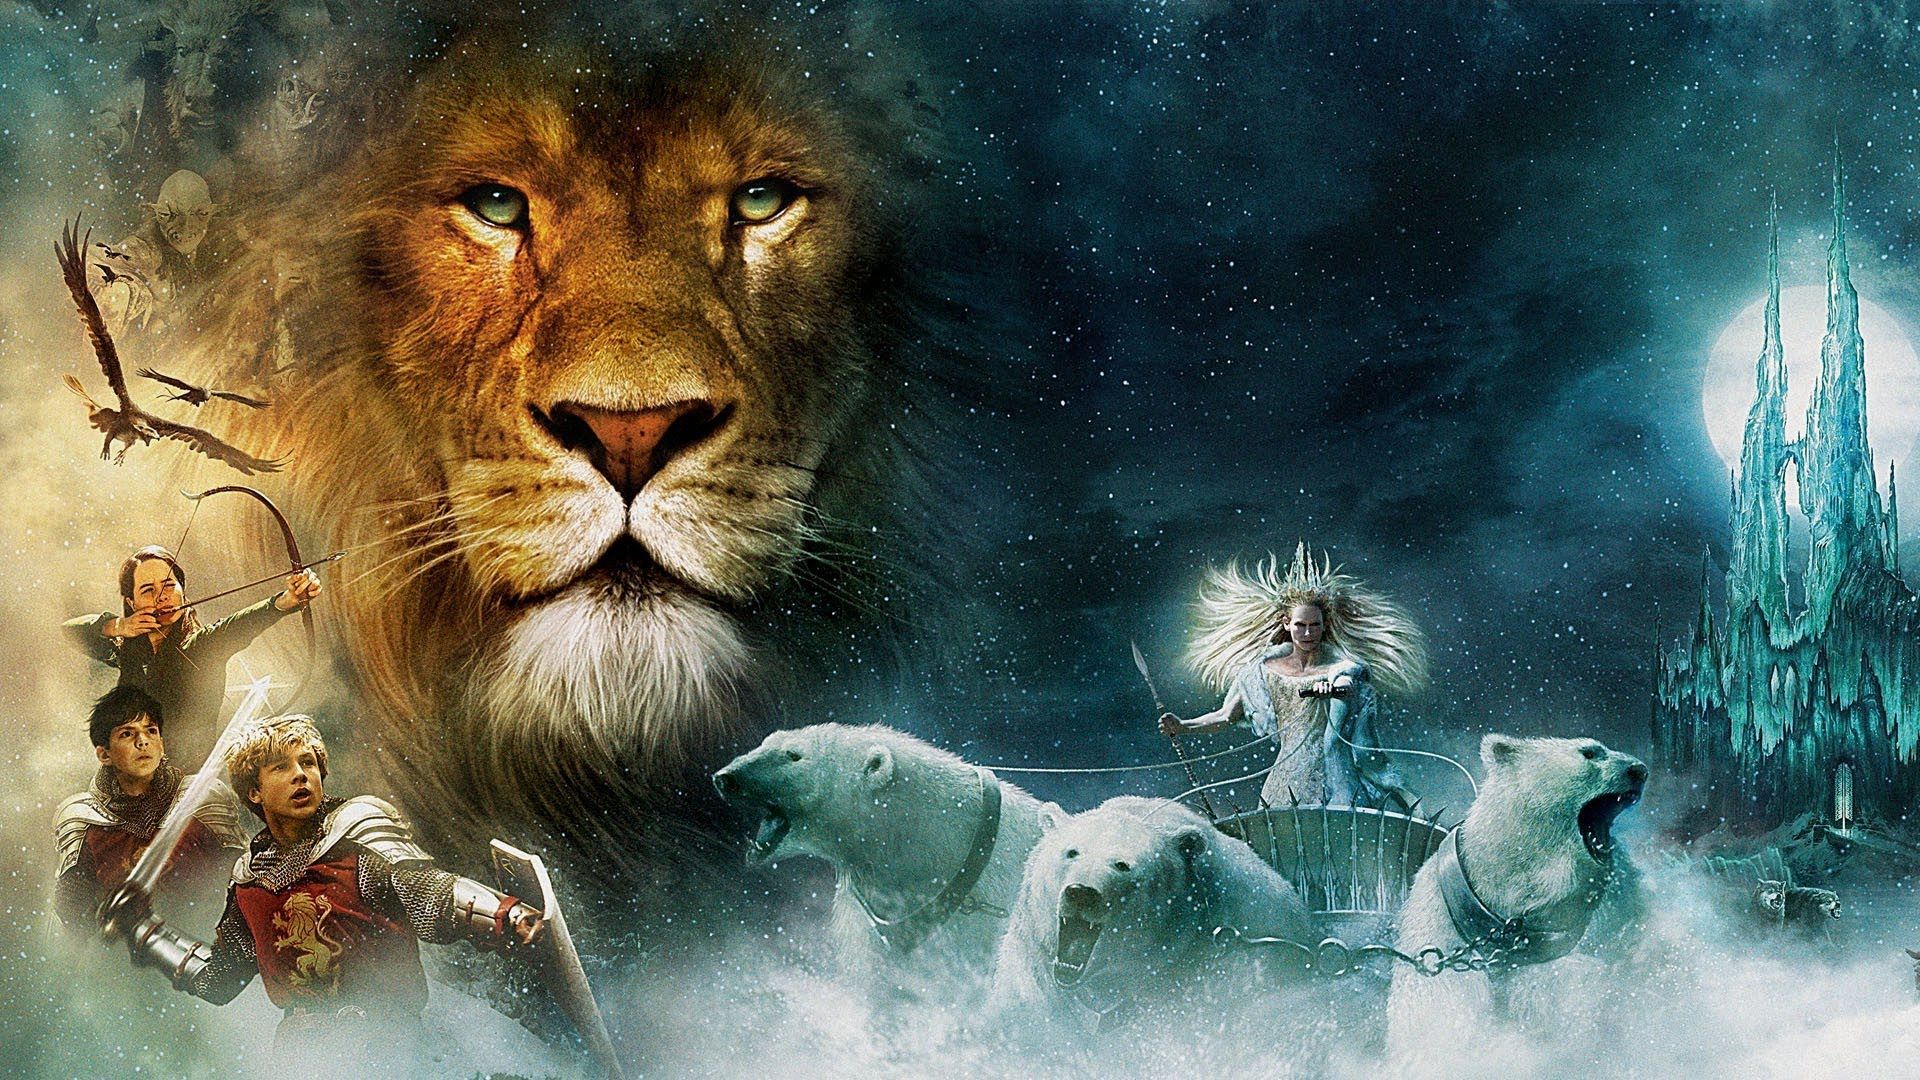 The Chronicles Of Narnia: The Lion, The Witch And The Wardrobe wallpaper, Movie, HQ The Chronicles Of Narnia: The Lion, The Witch And The Wardrobe pictureK Wallpaper 2019